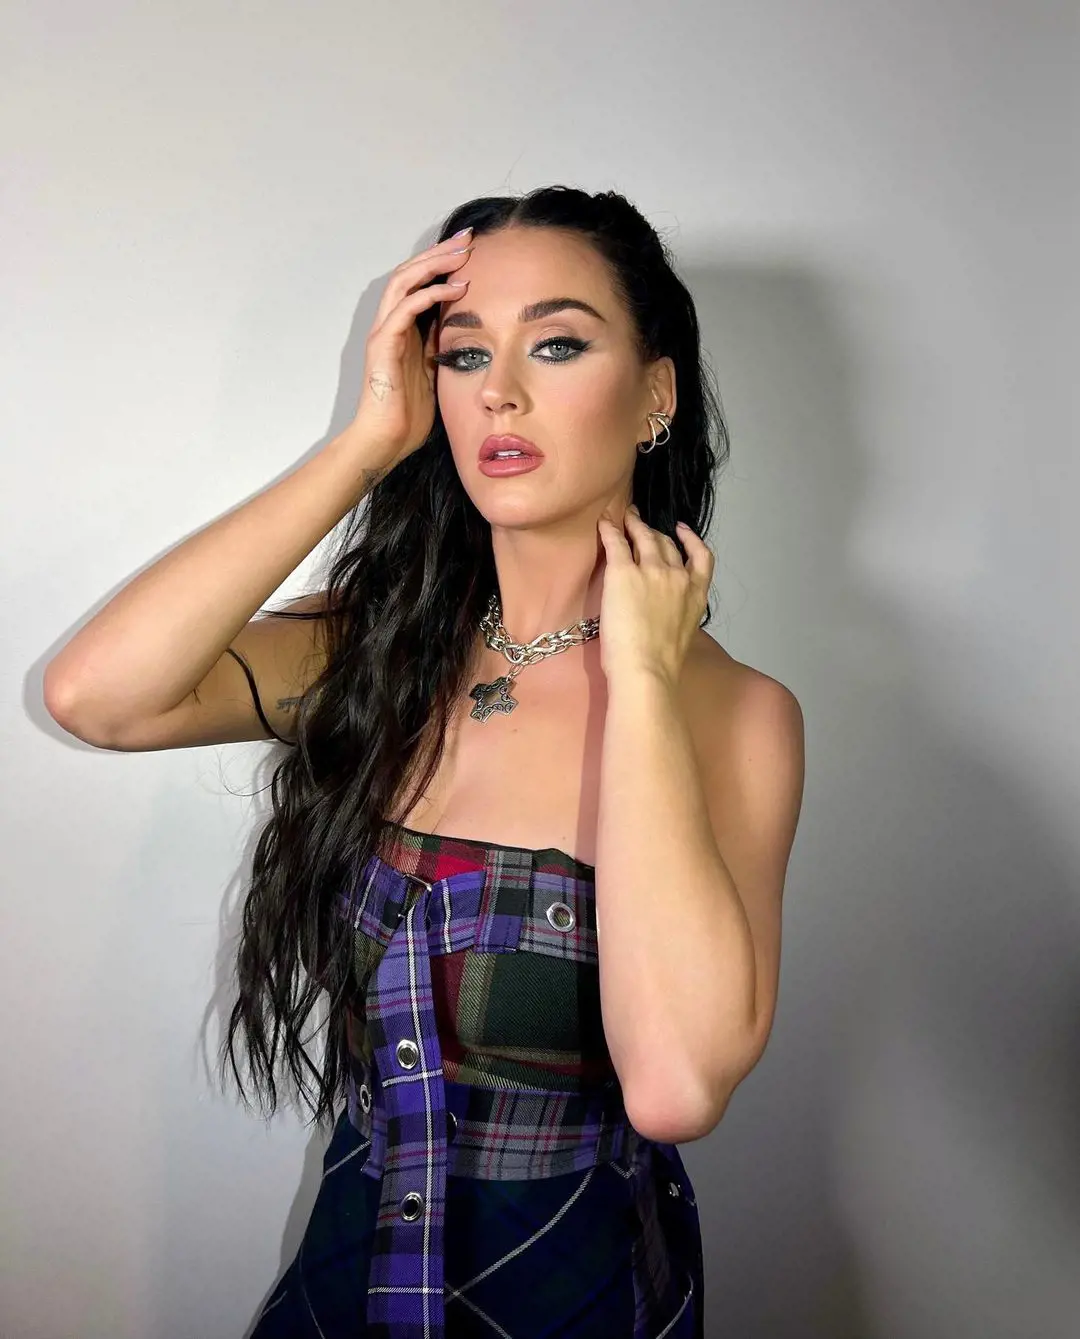 Katy Perry is an American singer who has taken the role of a judge in American Idol since 2018.